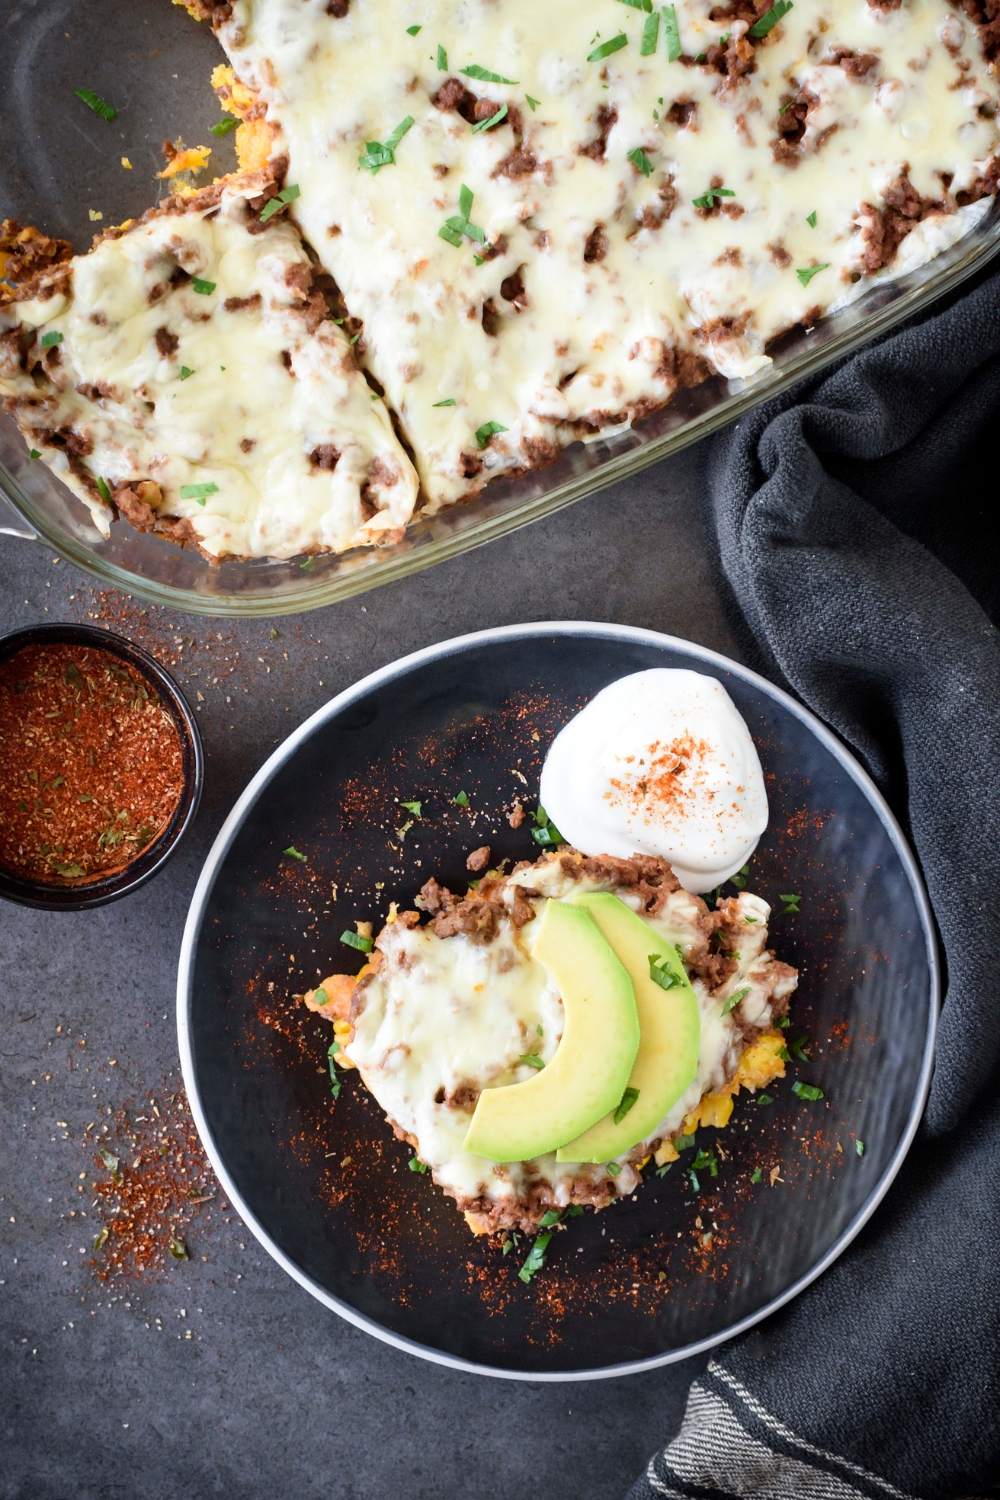 A serving of beef tamale casserole on a plate next to the rest of the casserole. The casserole is garnished with spices, sliced avocado, and sour cream.